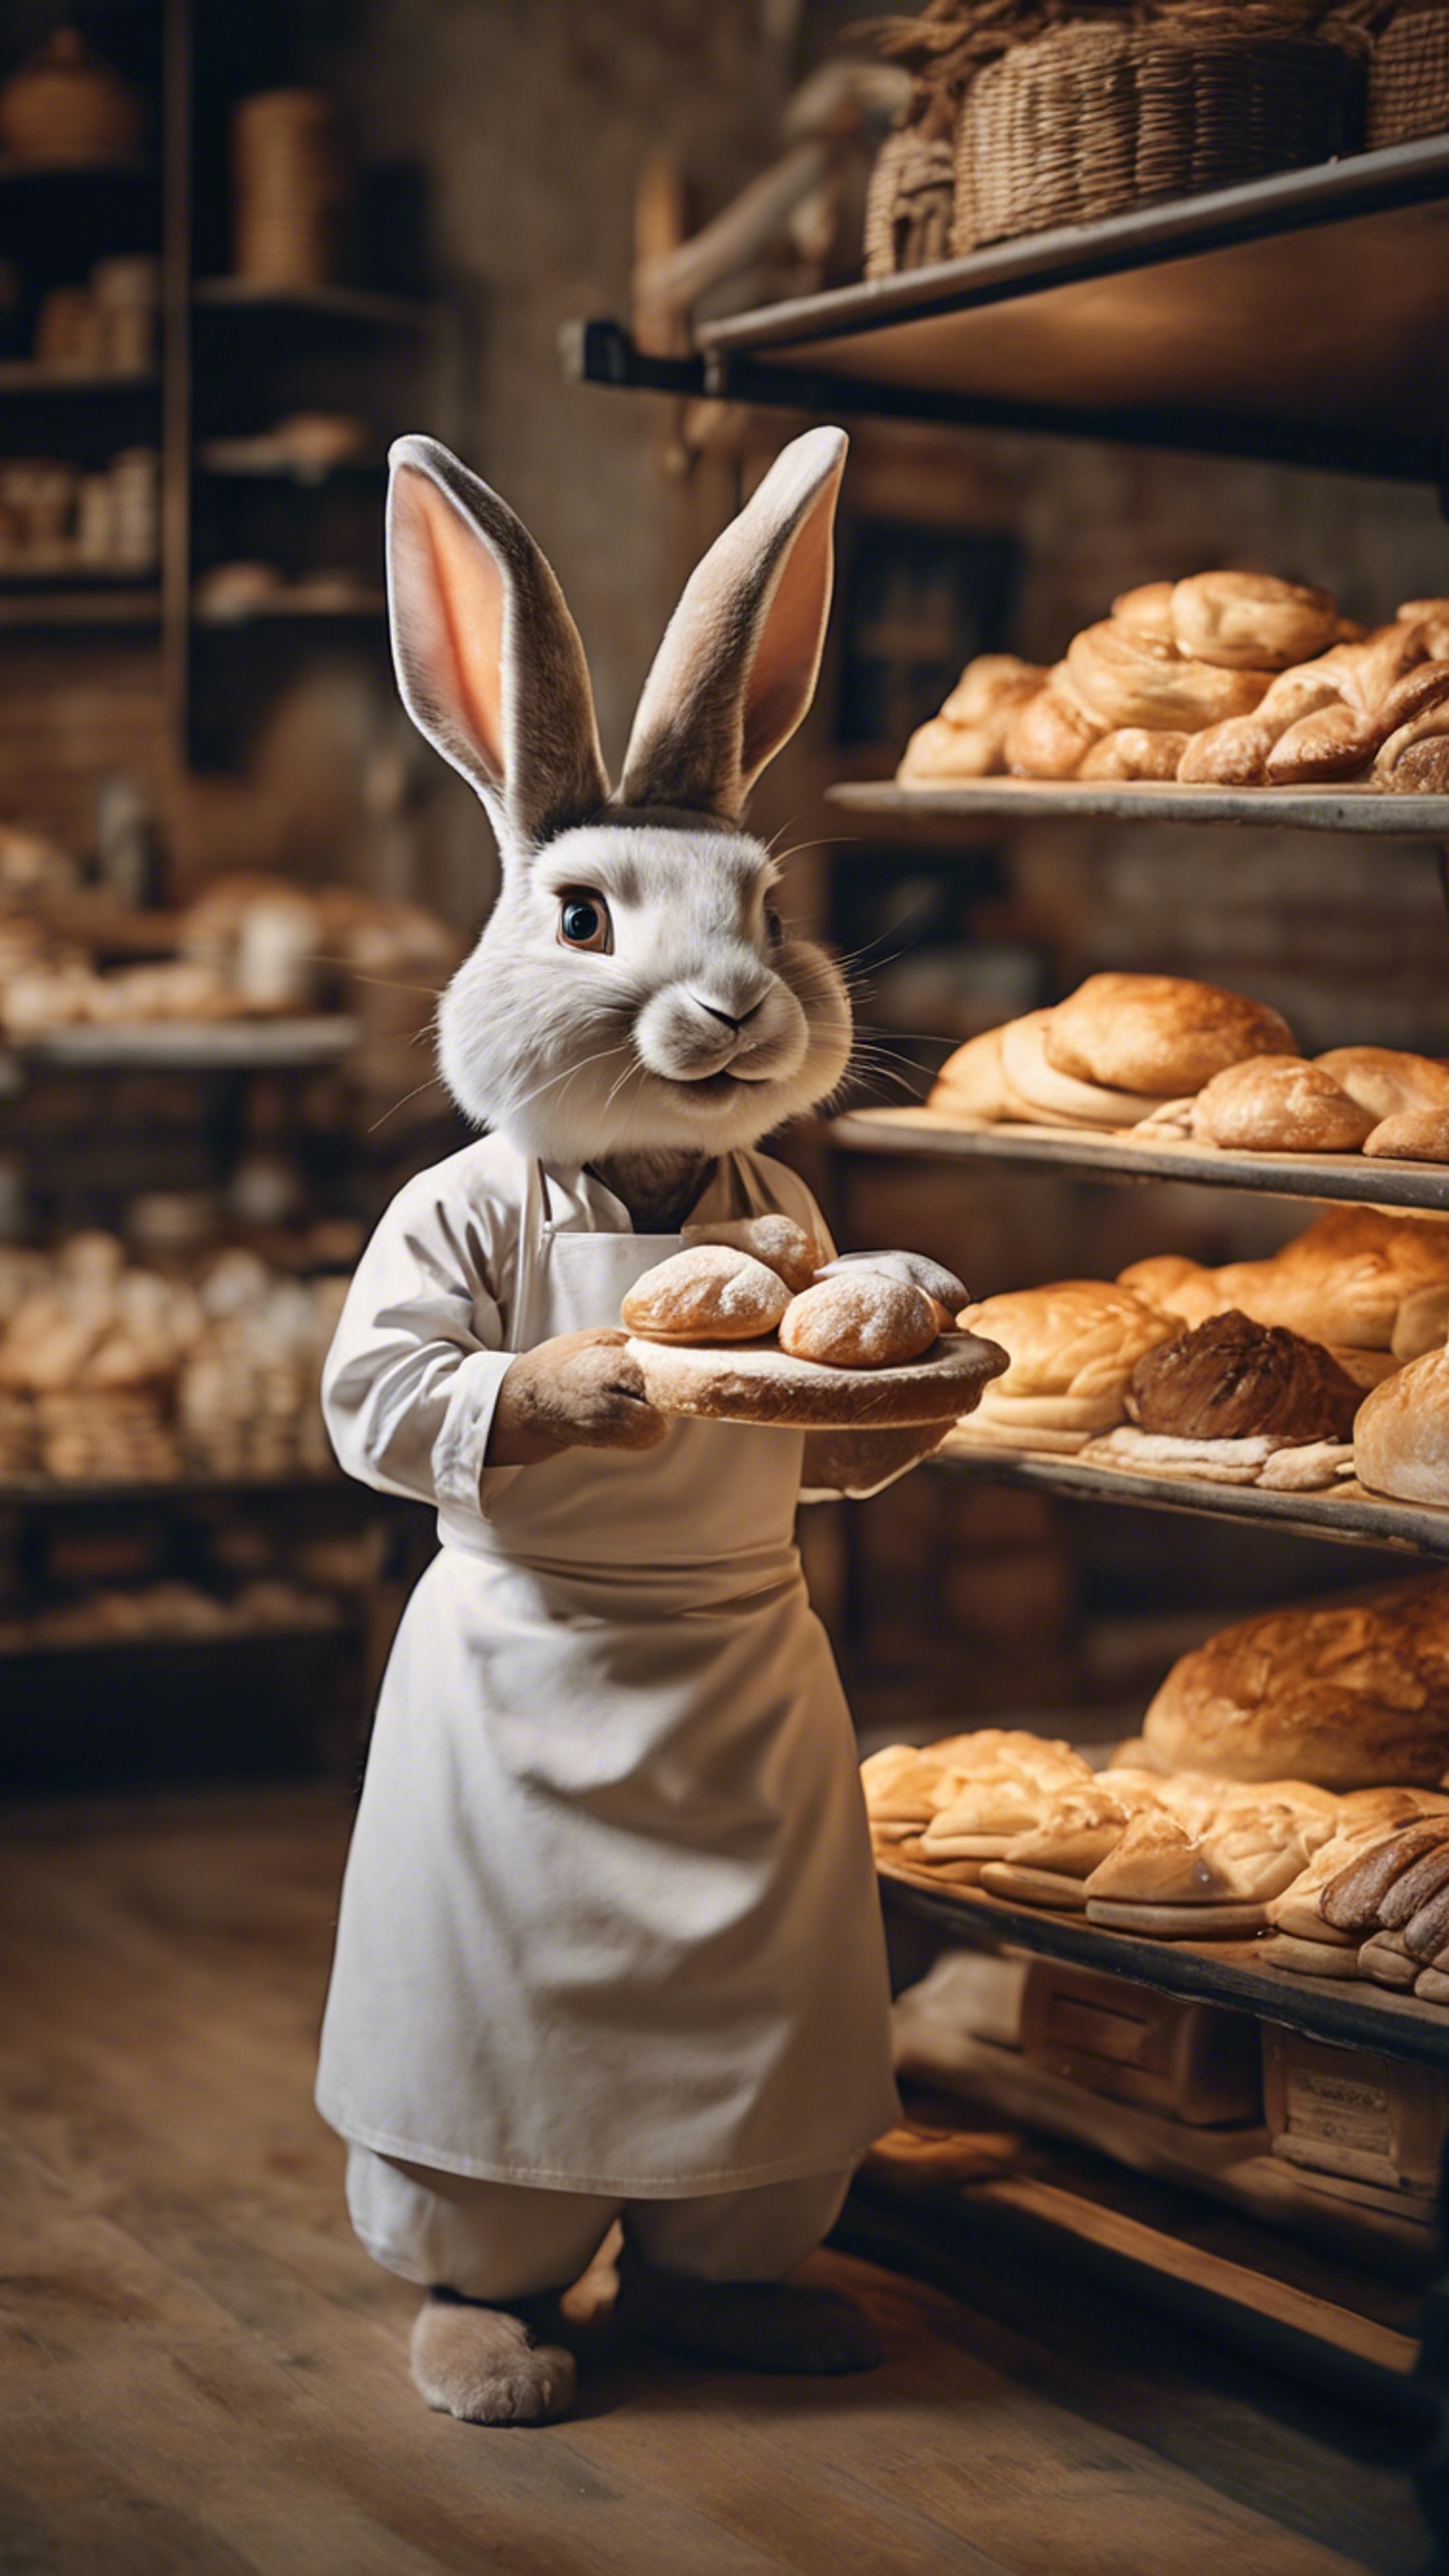 A rabbit baker displaying freshly-baked goods in a charming bakery. Обои[908b61b6762c4c248f7e]